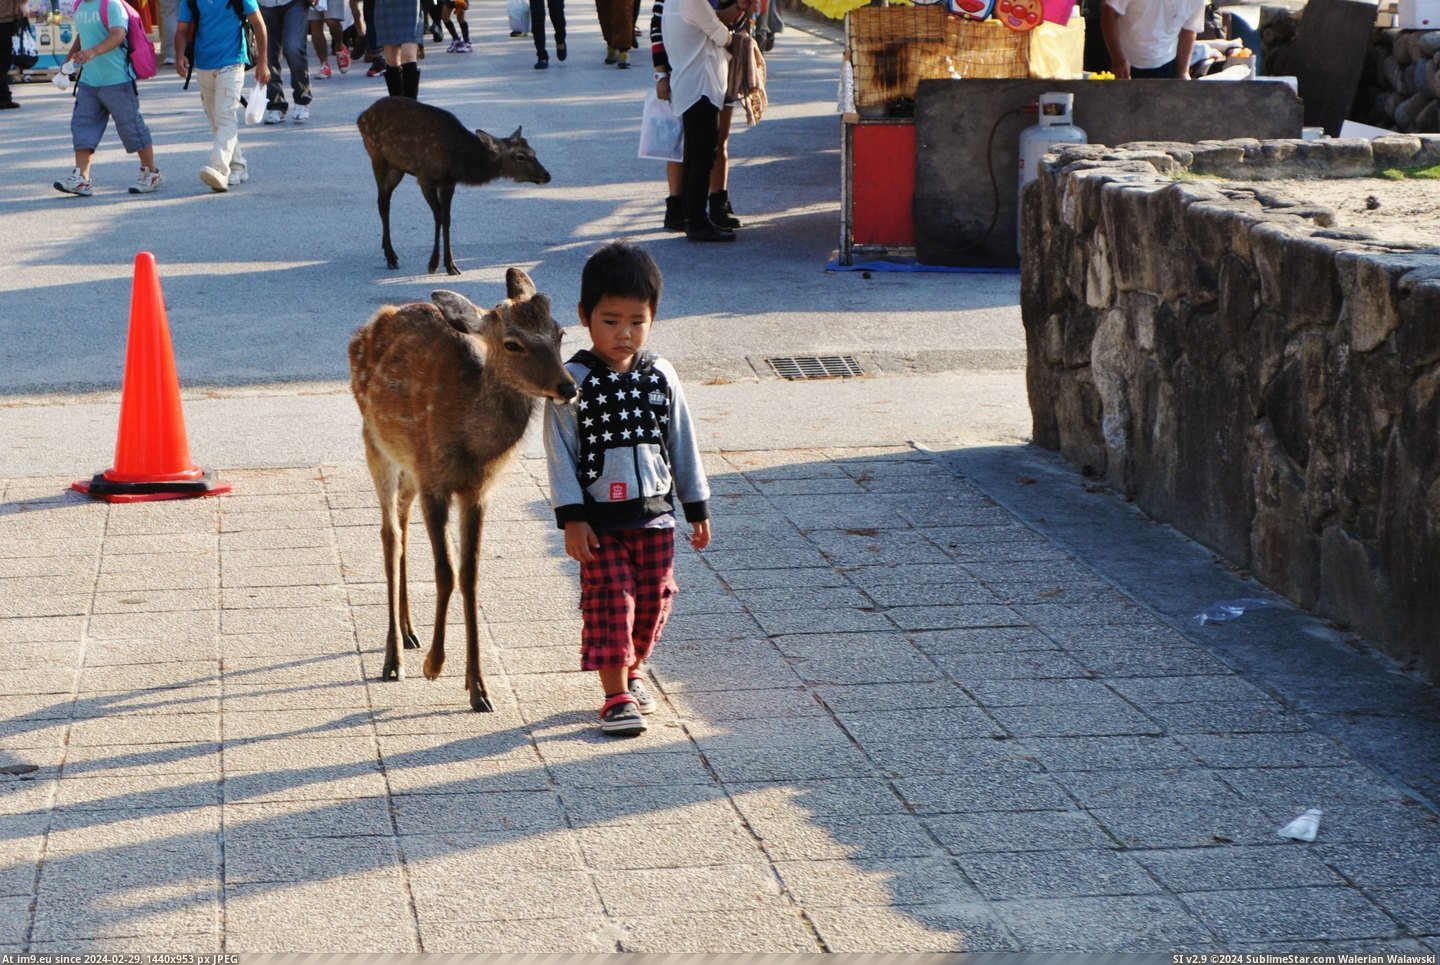 #One #Free #Island #Hundreds #Roam #Silently #Miyajima #Japan #Walking #Deer [Aww] There's an island in Japan, Miyajima, where deer roam free by the hundreds. This one was silently walking around with this Pic. (Bild von album My r/AWW favs))